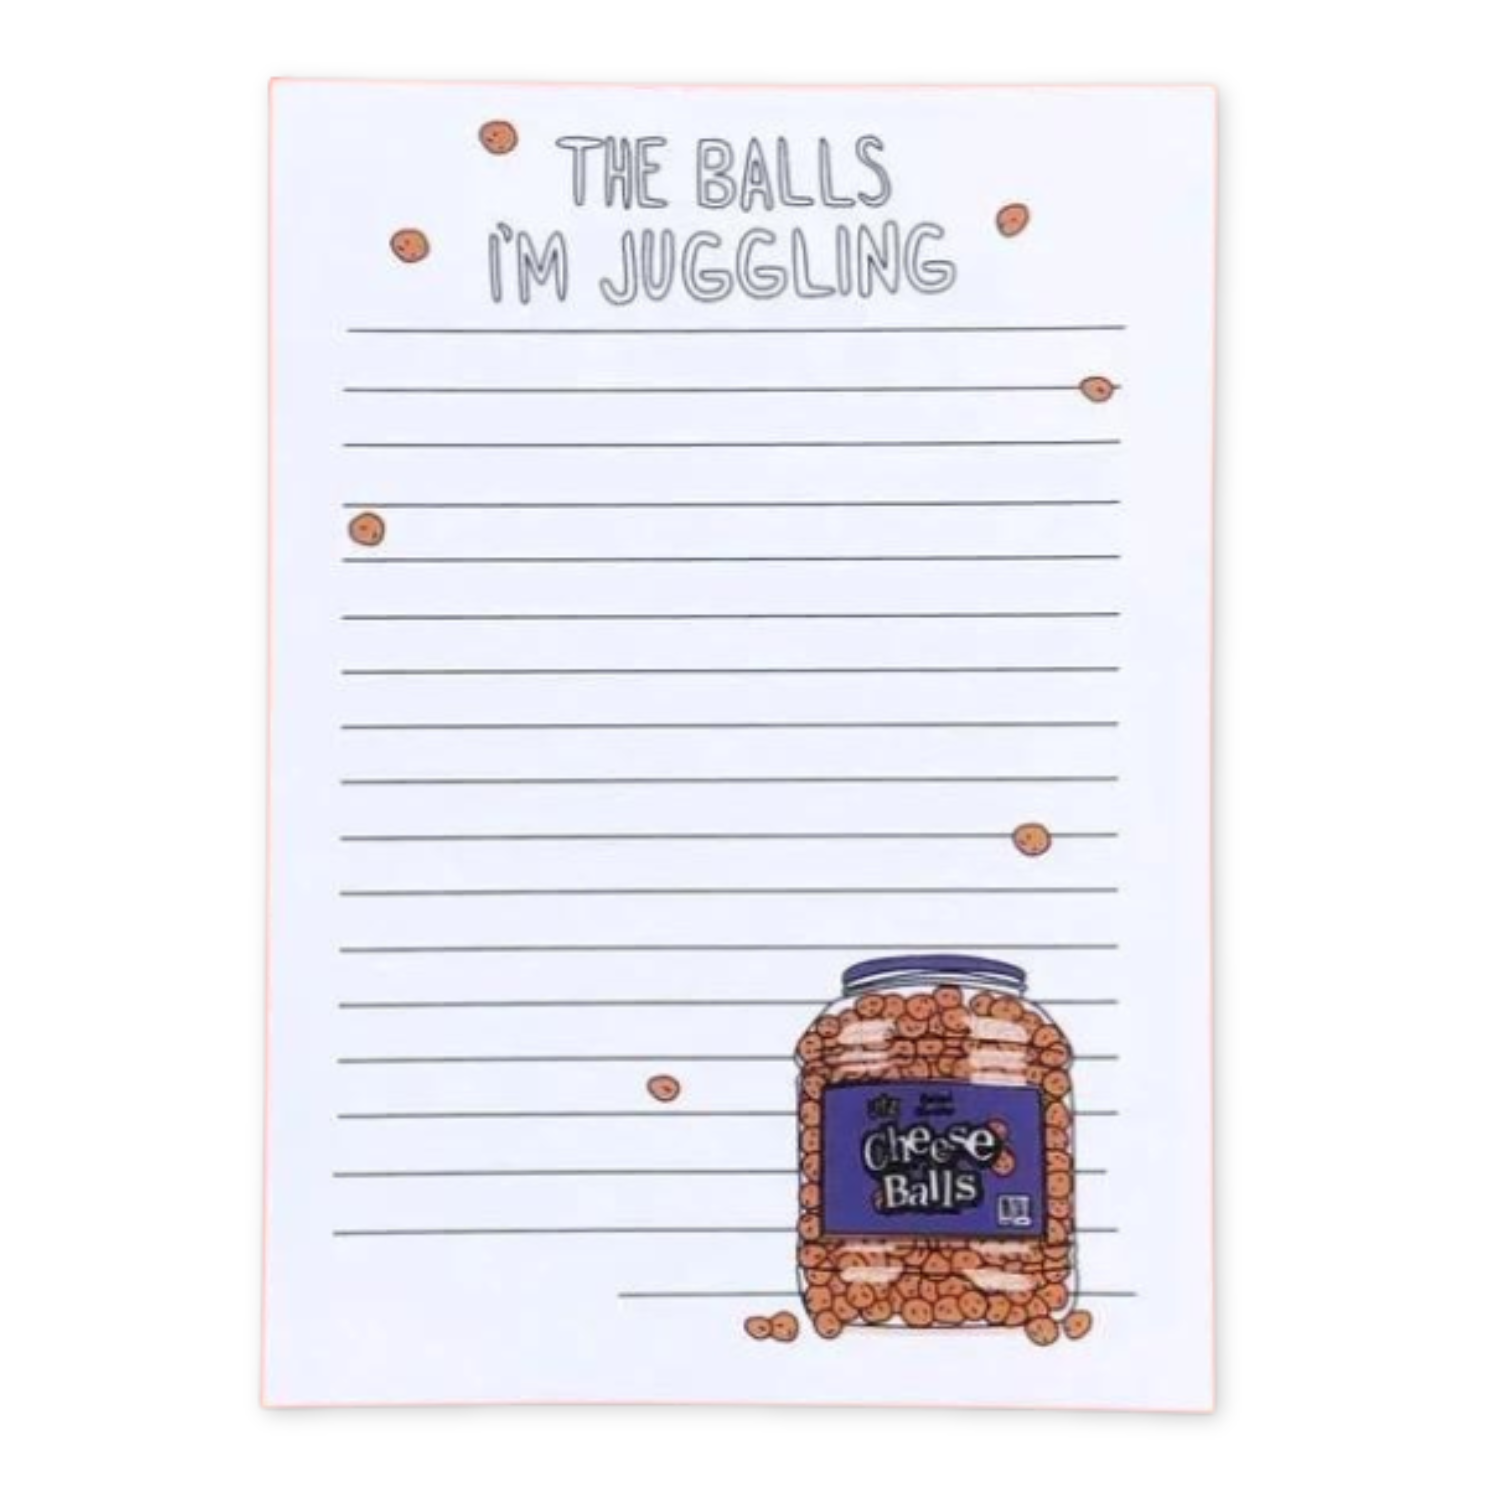 Notepad with cheeseballs and lines